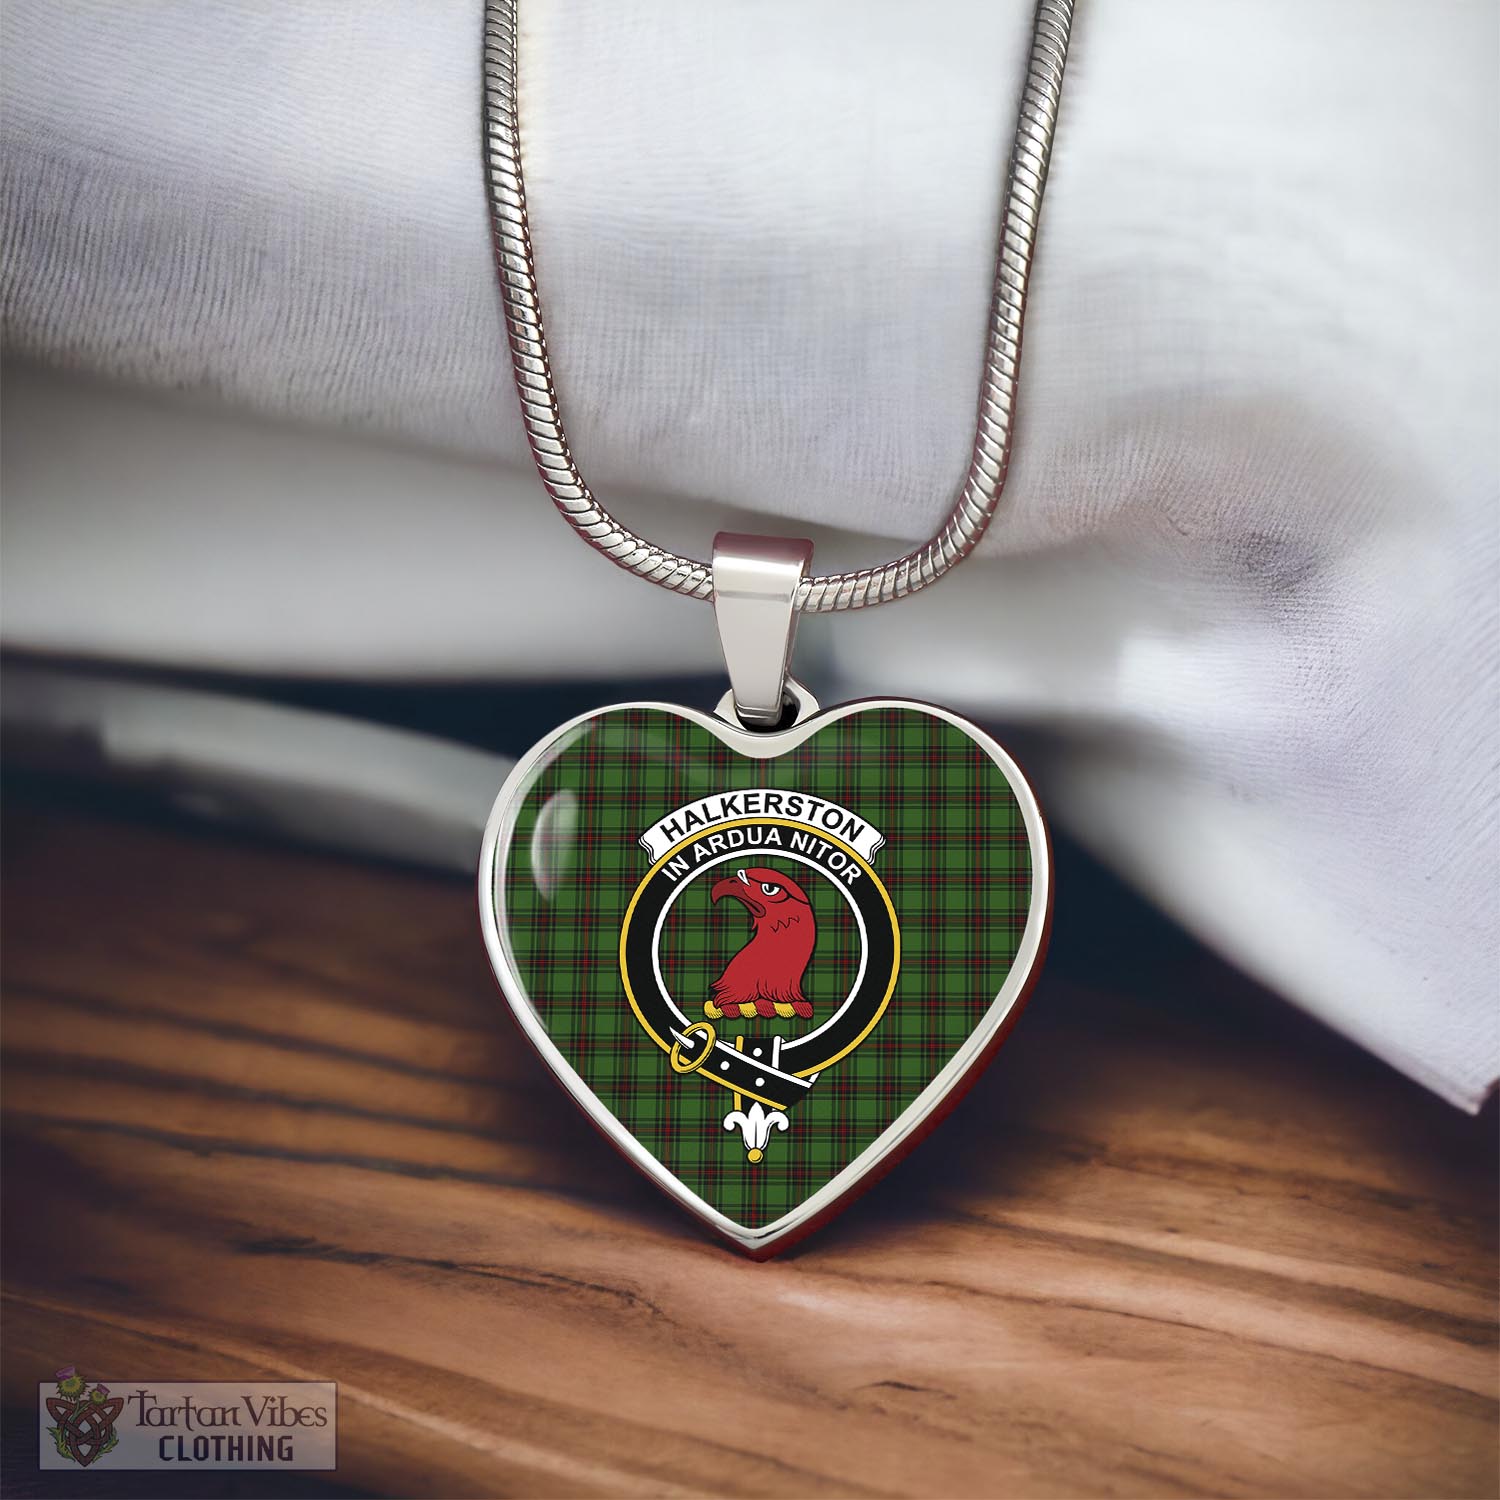 Tartan Vibes Clothing Halkerston Tartan Heart Necklace with Family Crest